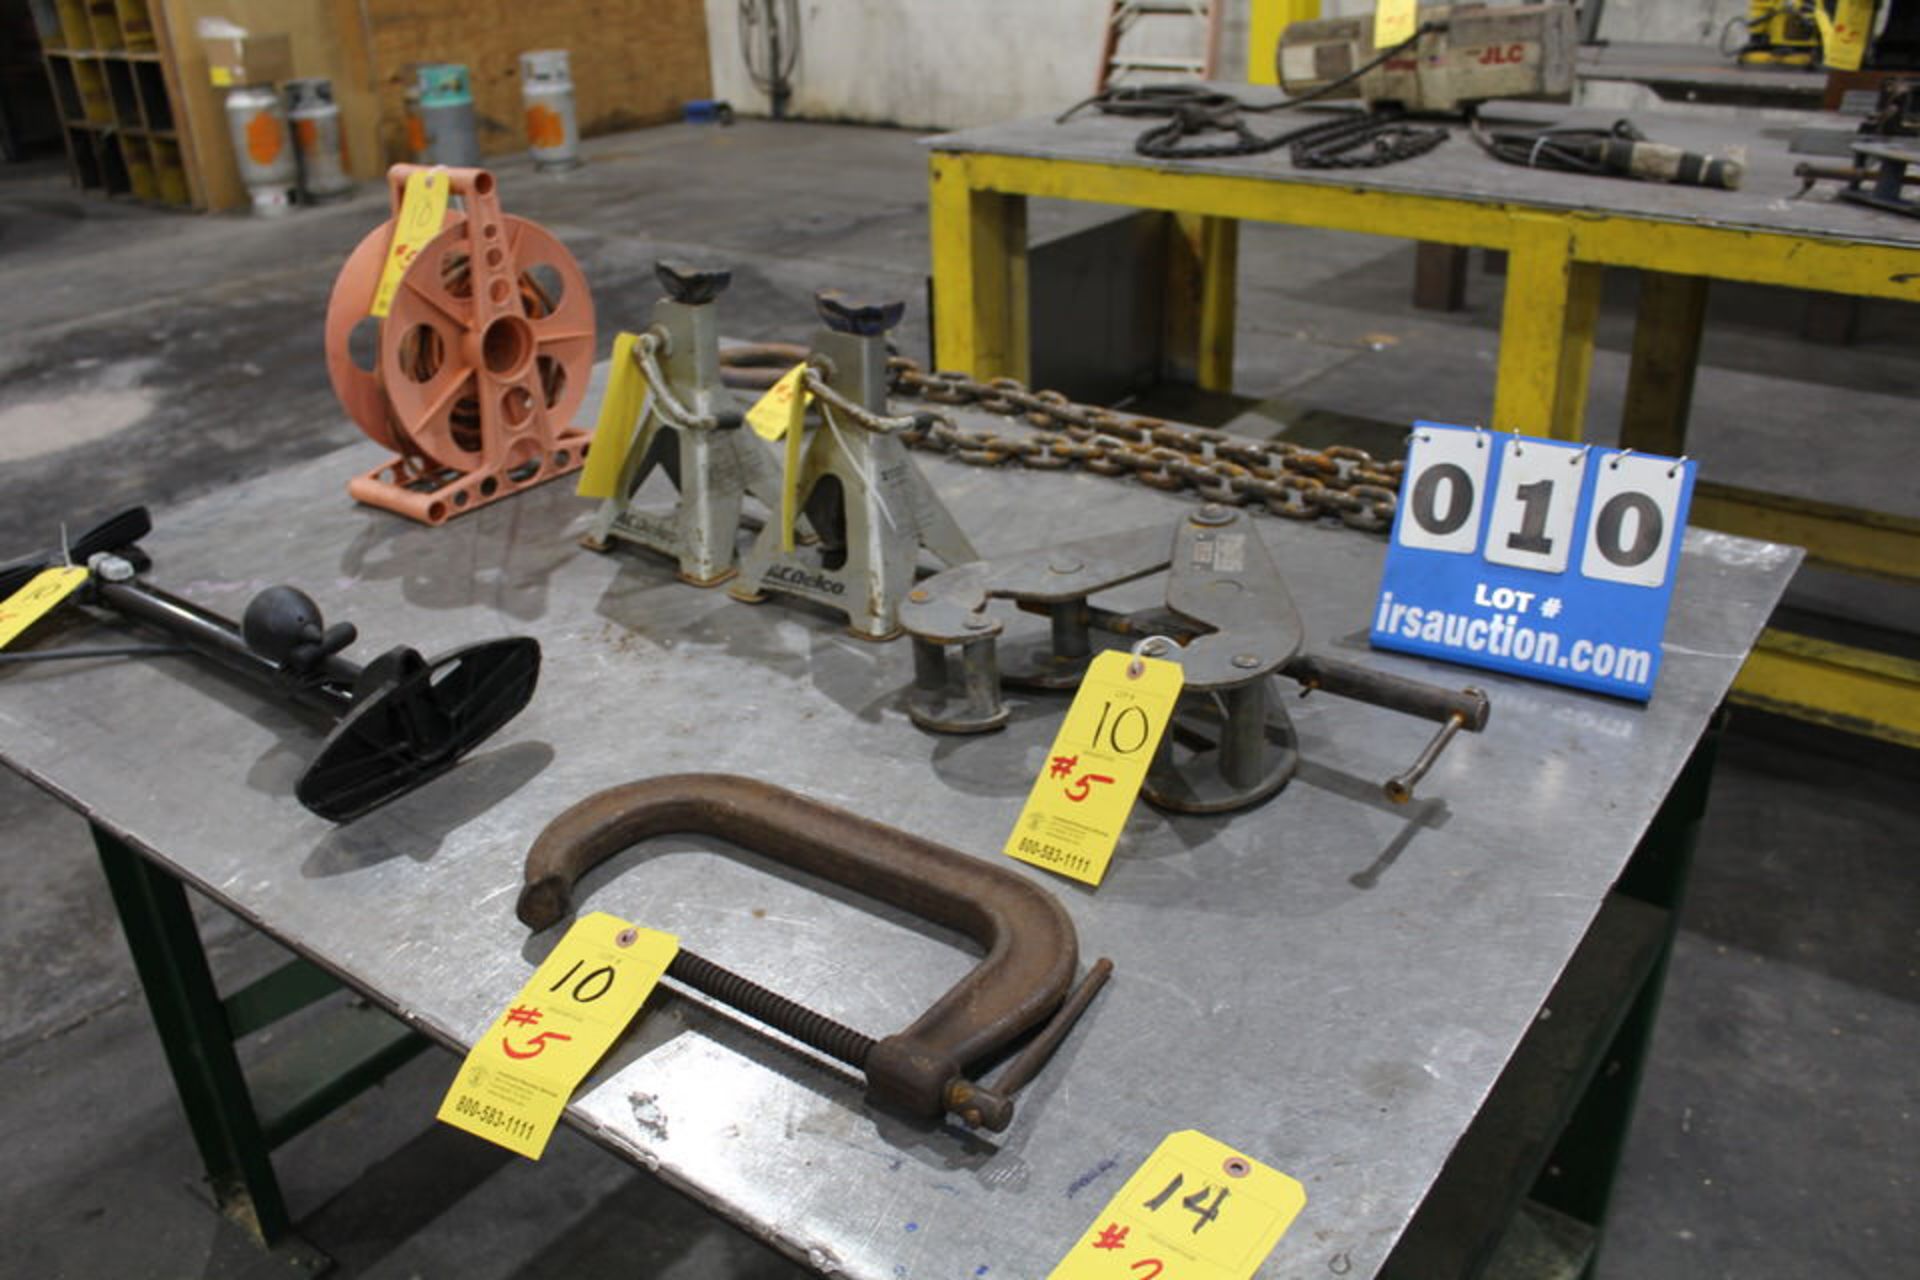 CONT OF TABLE: DOUBLE HOOK CHAIN, JET BEAM CLAMP, 10” C CLAMP, (2) AC DELCO MECHANIC STANDS, ELEC